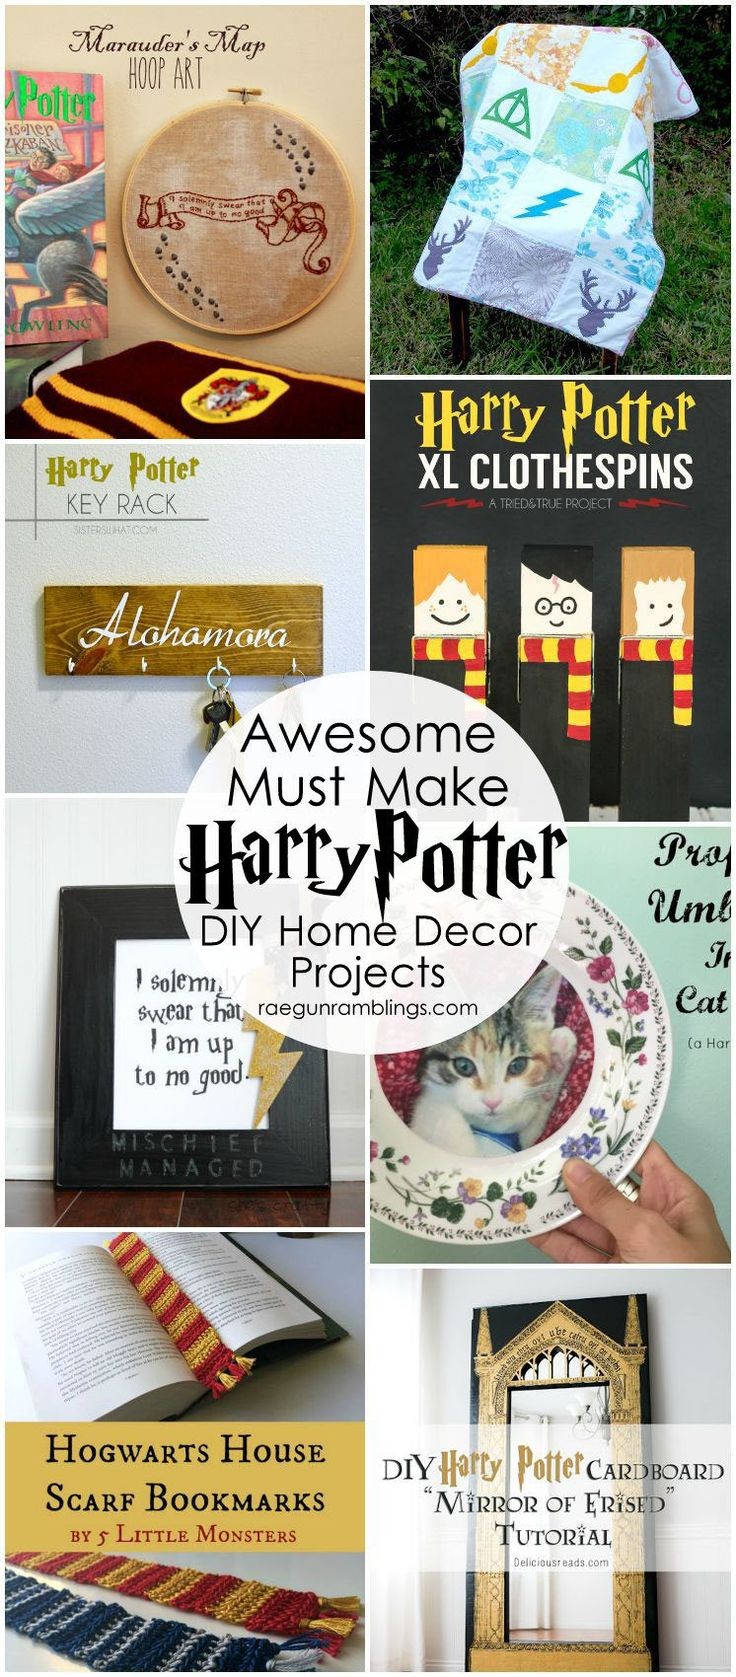 Great decorating ideas. DIY harry potter home deco...